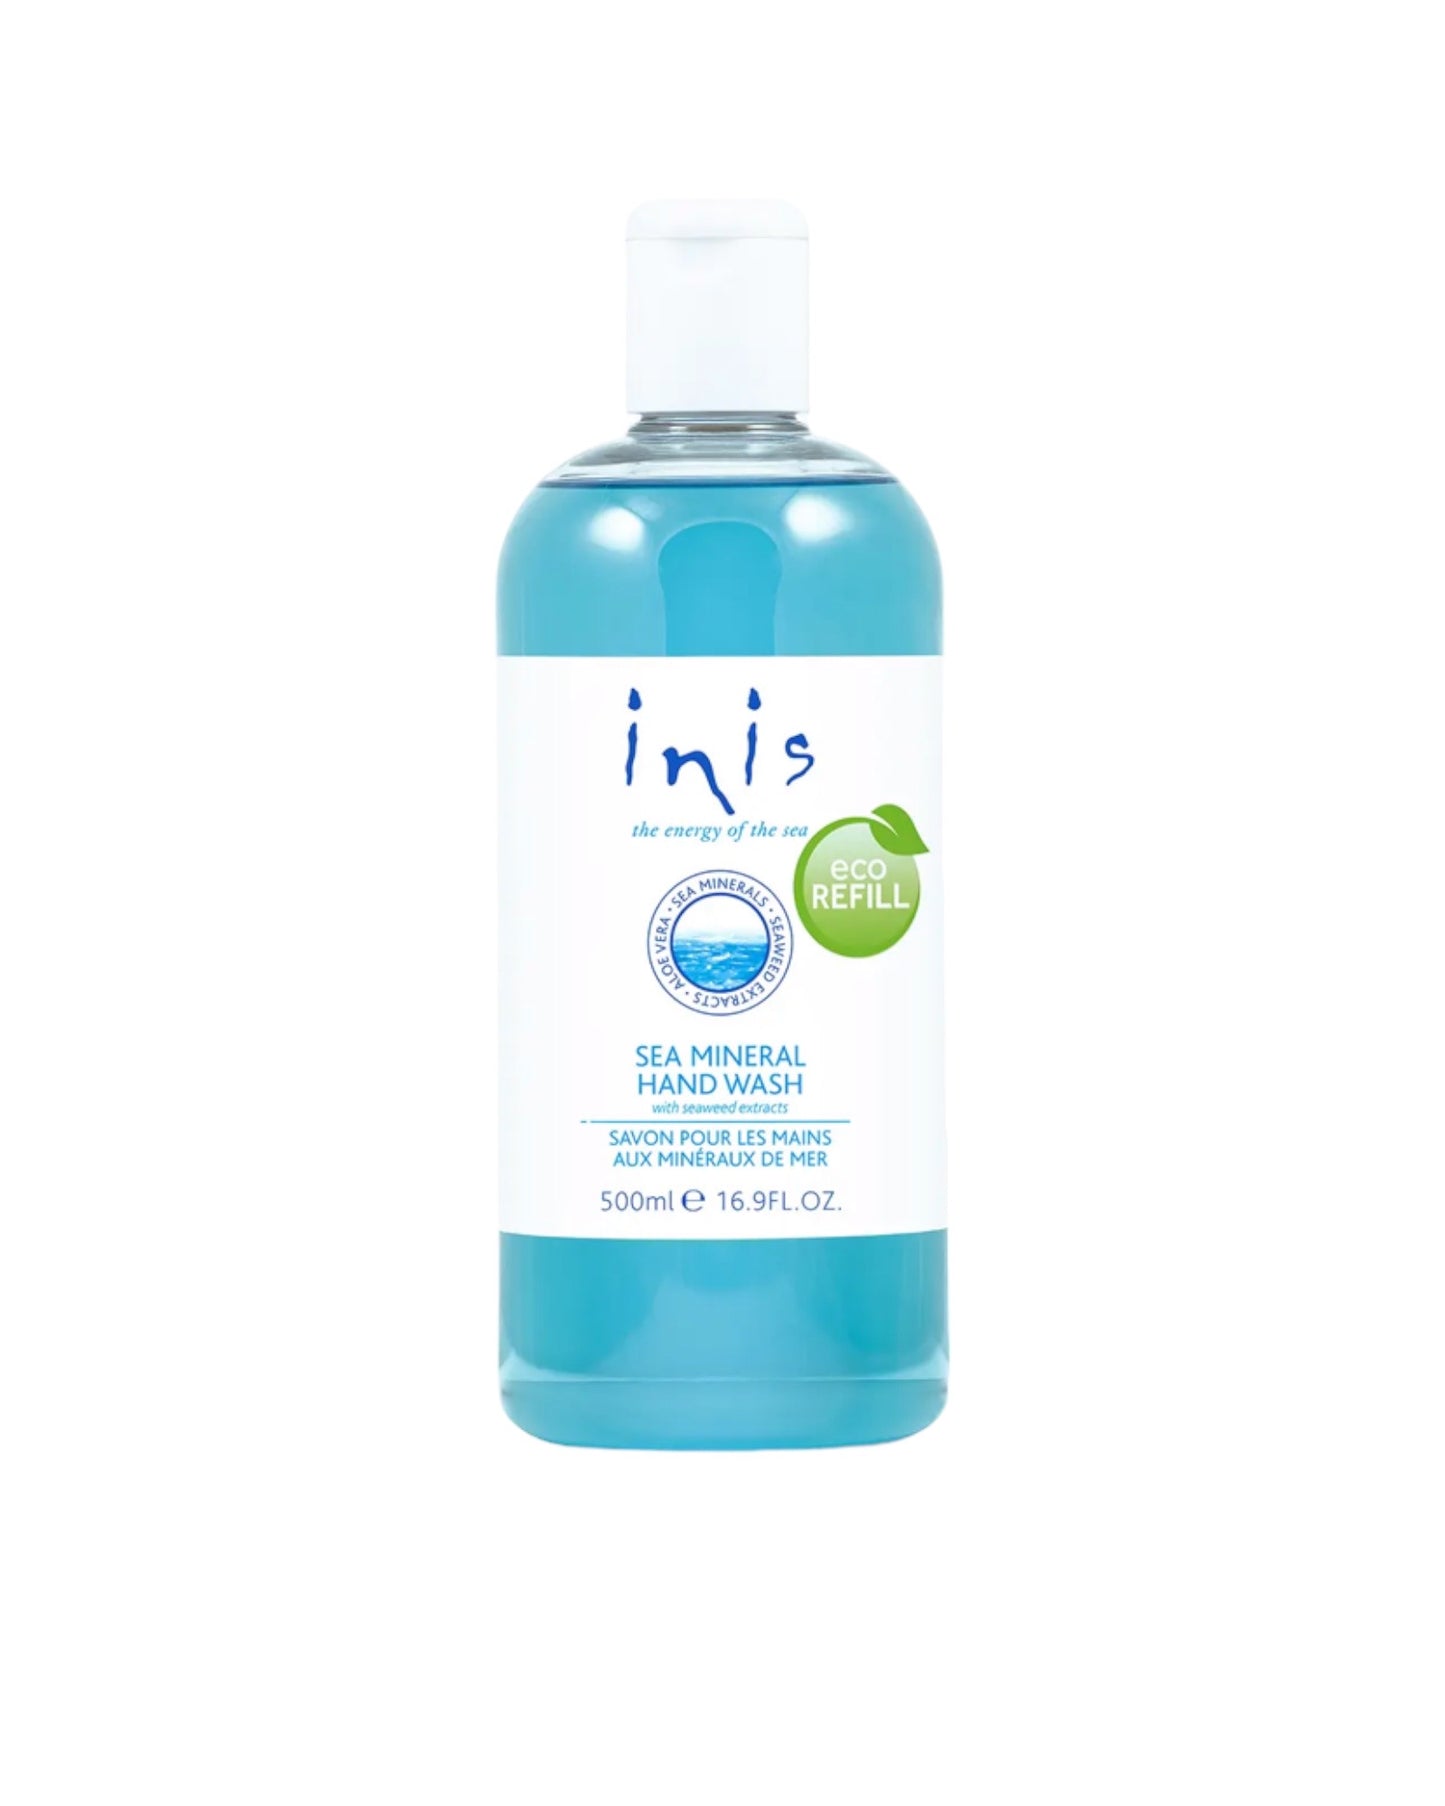 Inis Fragrance of Ireland Hand Wash Refill